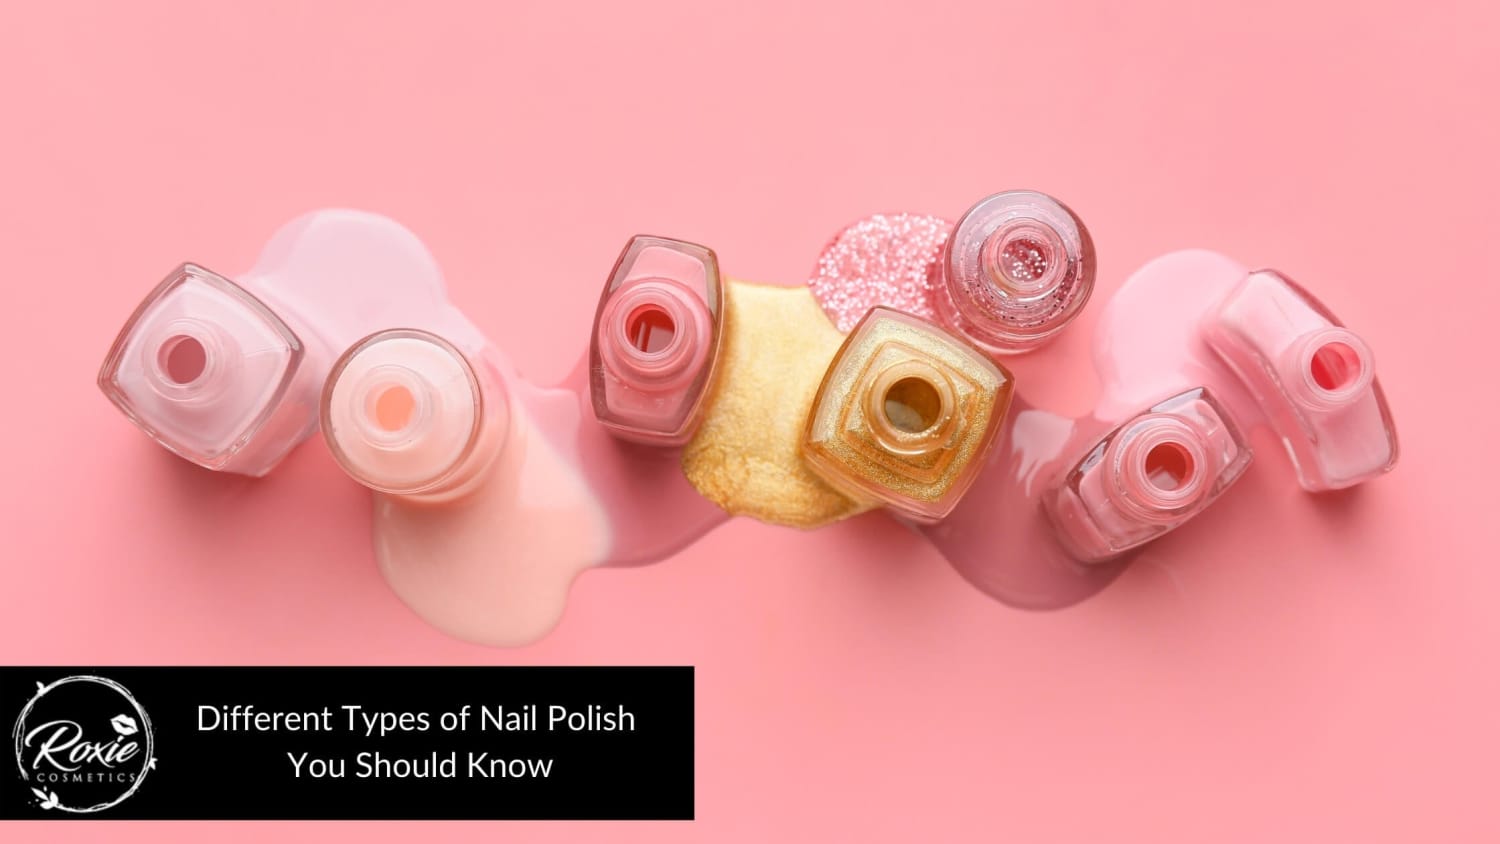 Different Types of Nail Polish You Should Know